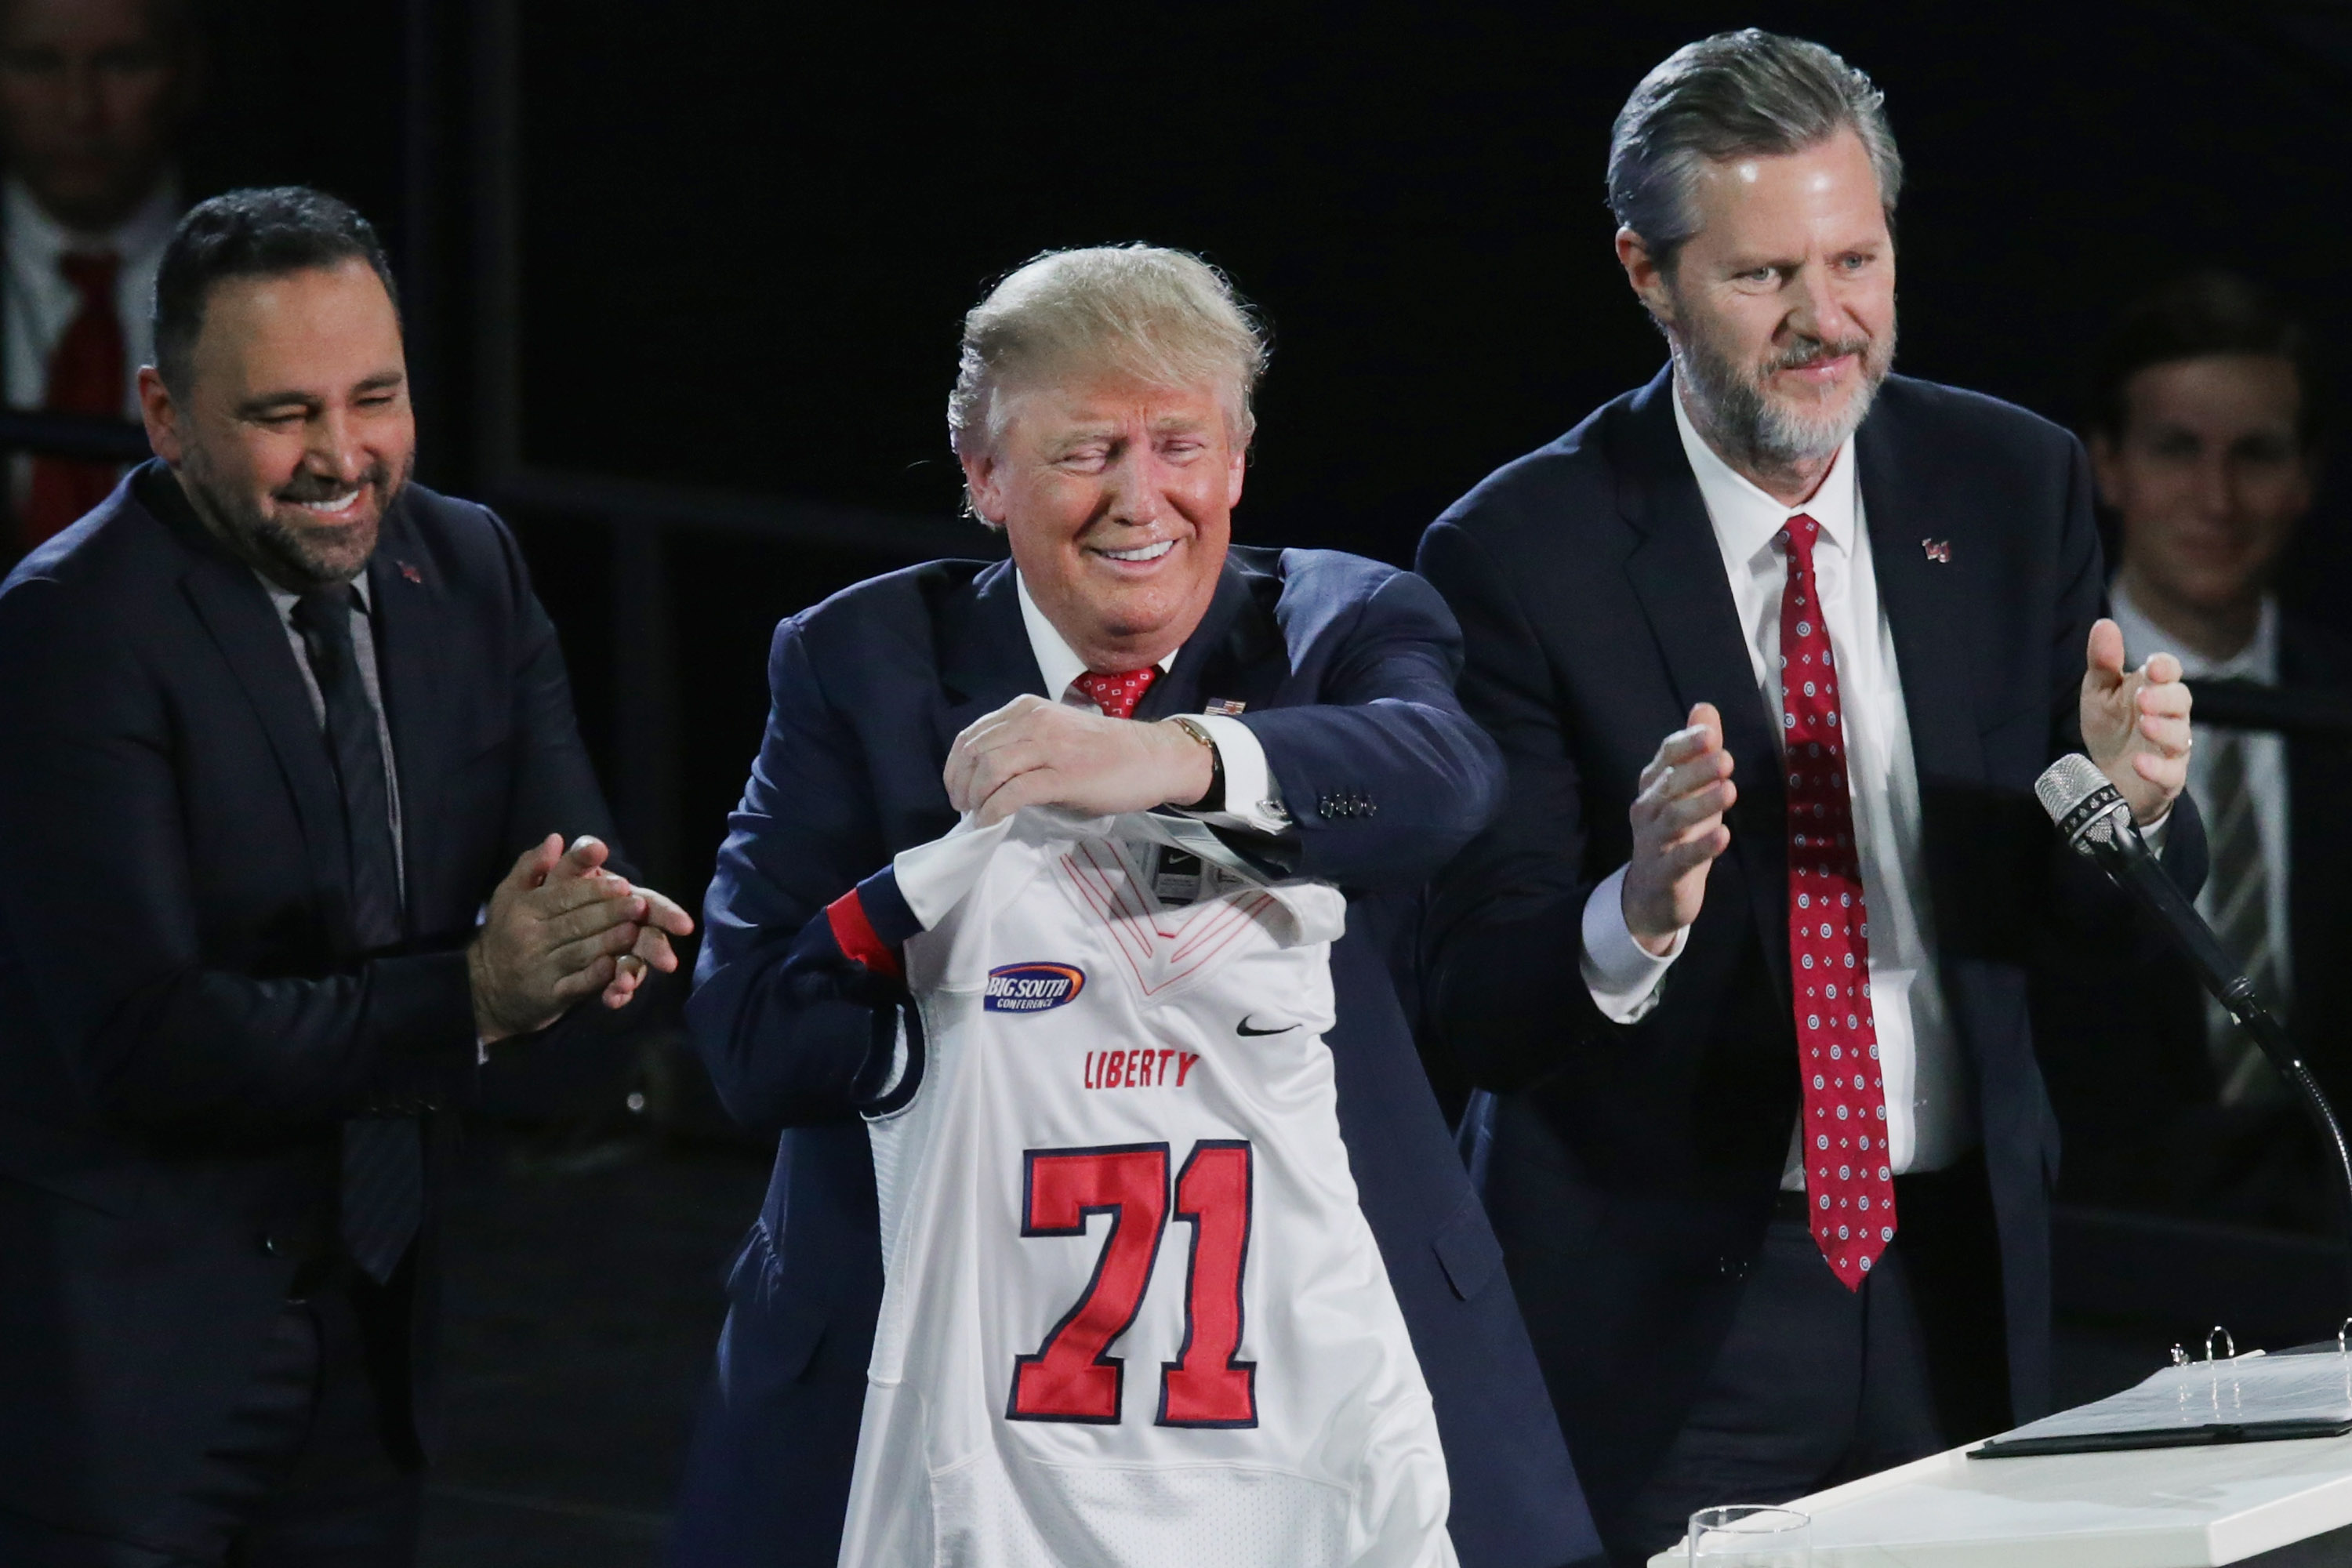 Liberty University President Jerry Falwell, Jr.  gives Donald Trump  a sports jersey after he delivered the convocation at Liberty University on January 18, 2016 in Lynchburg, Virginia. (Chip Somodevilla&mdash;Getty Images)